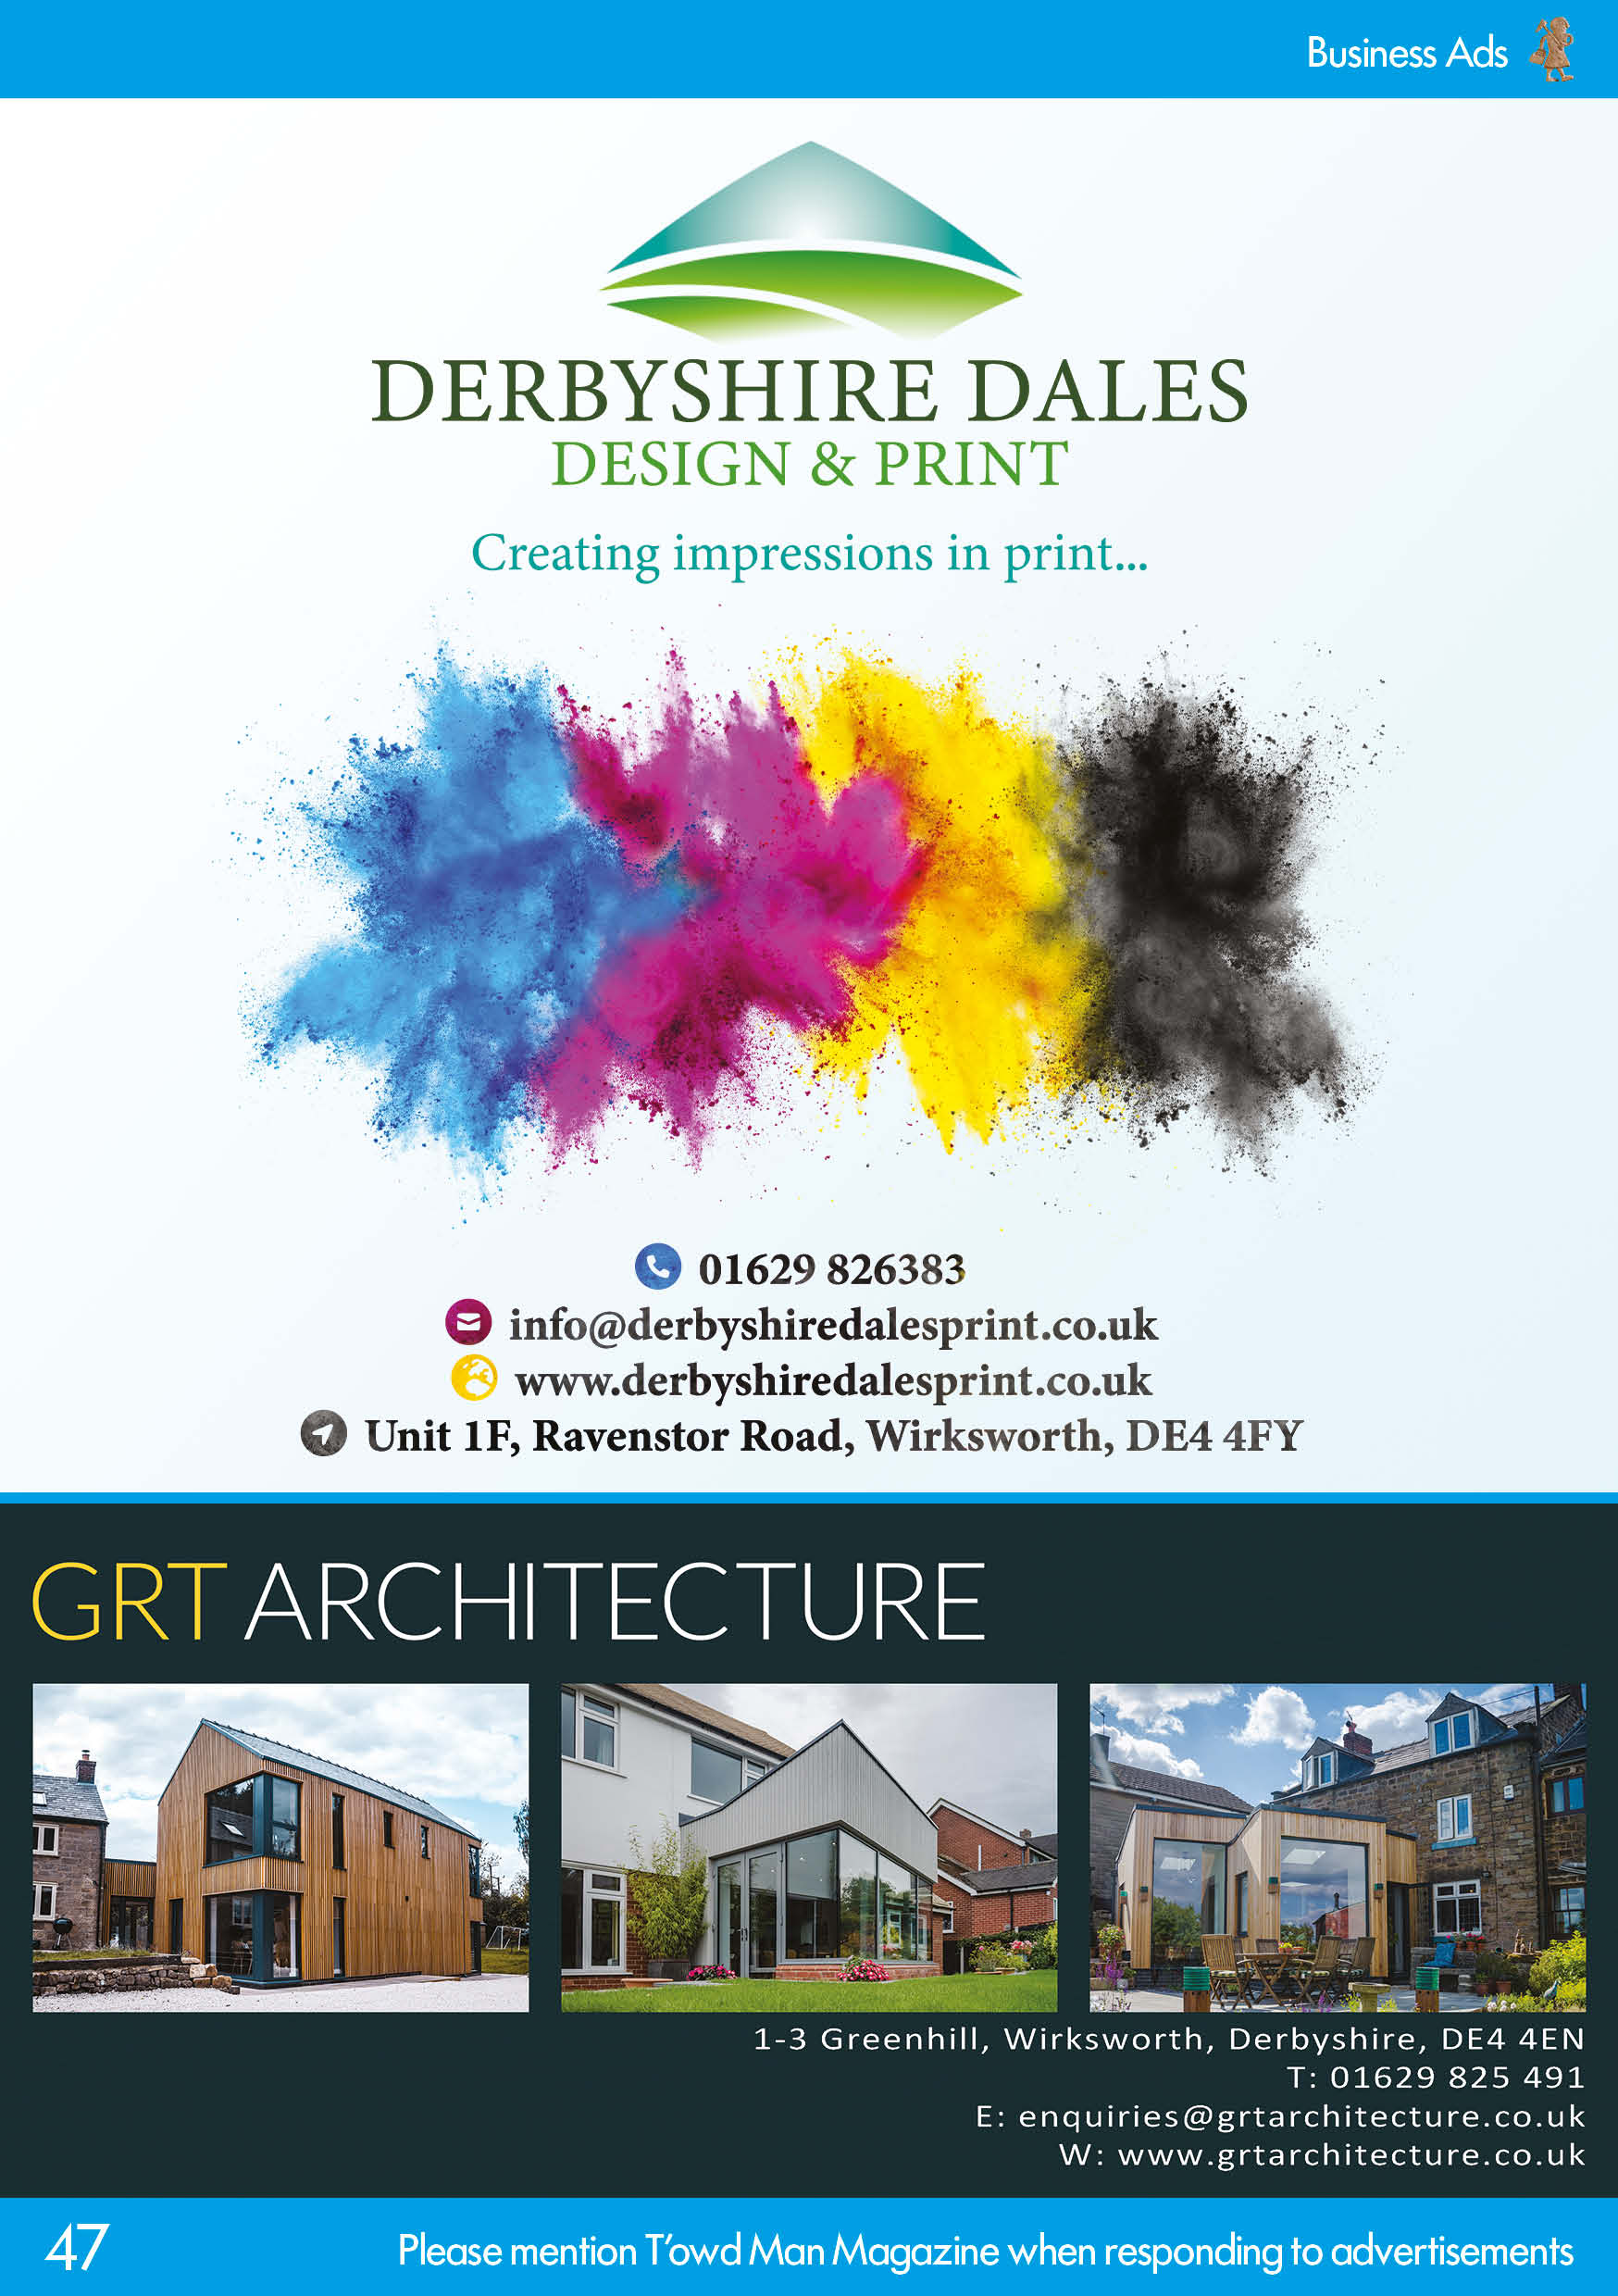 Deryshire Dales Design and Print